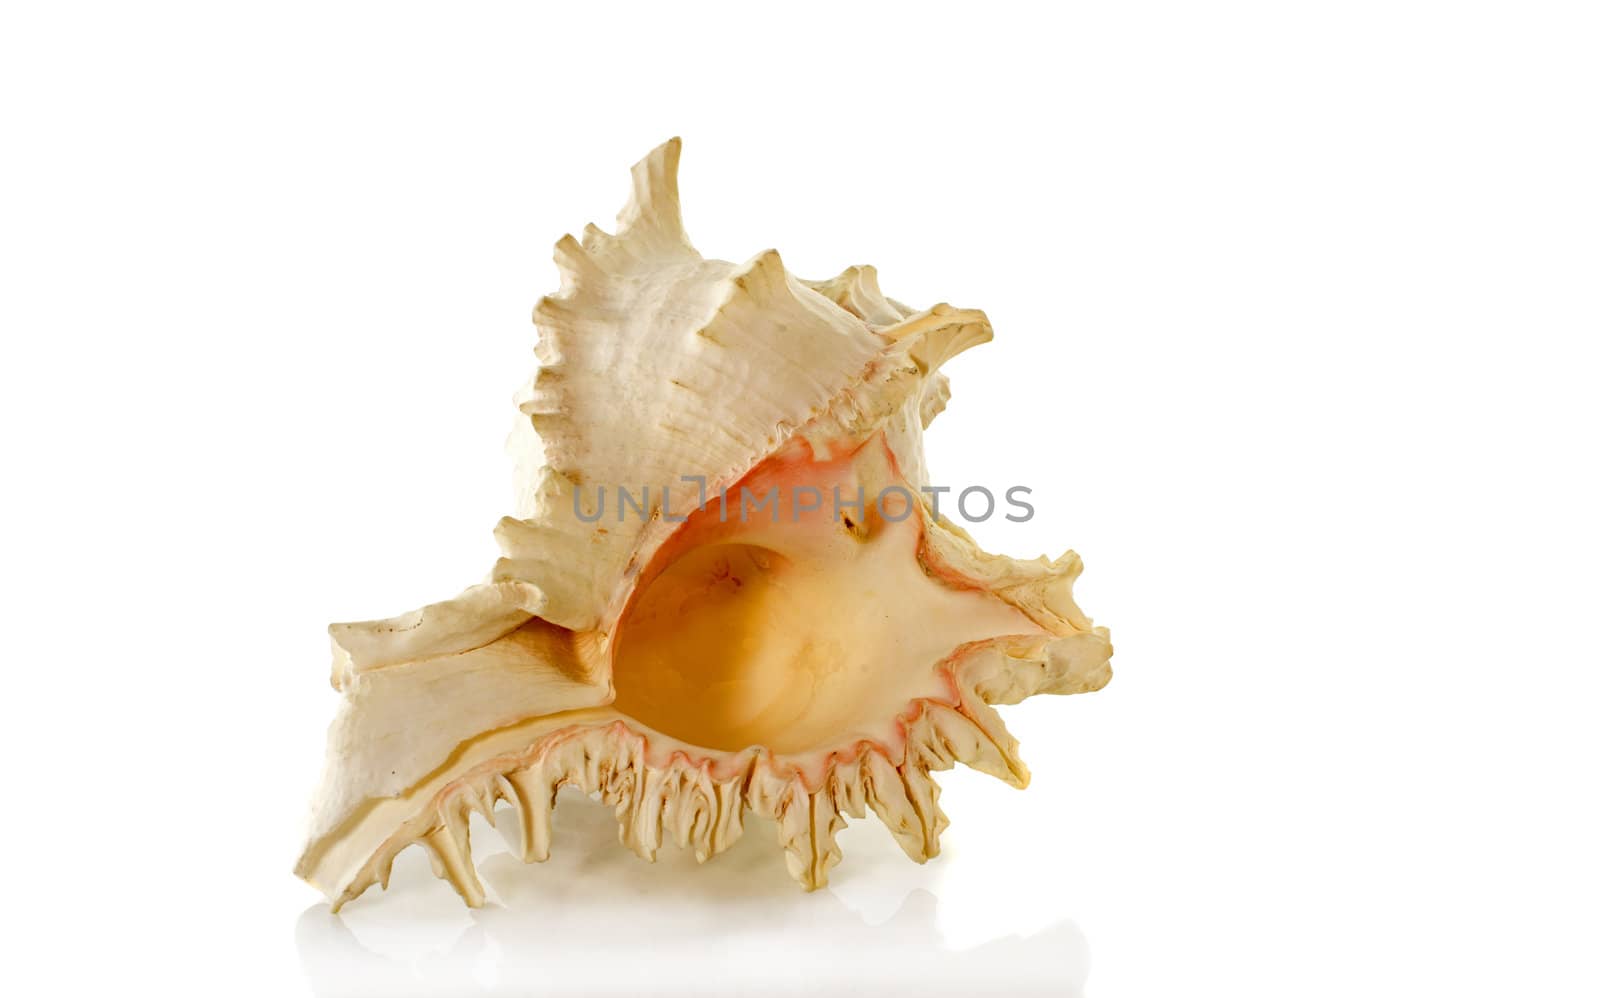 big shell with gold collor inside by compuinfoto